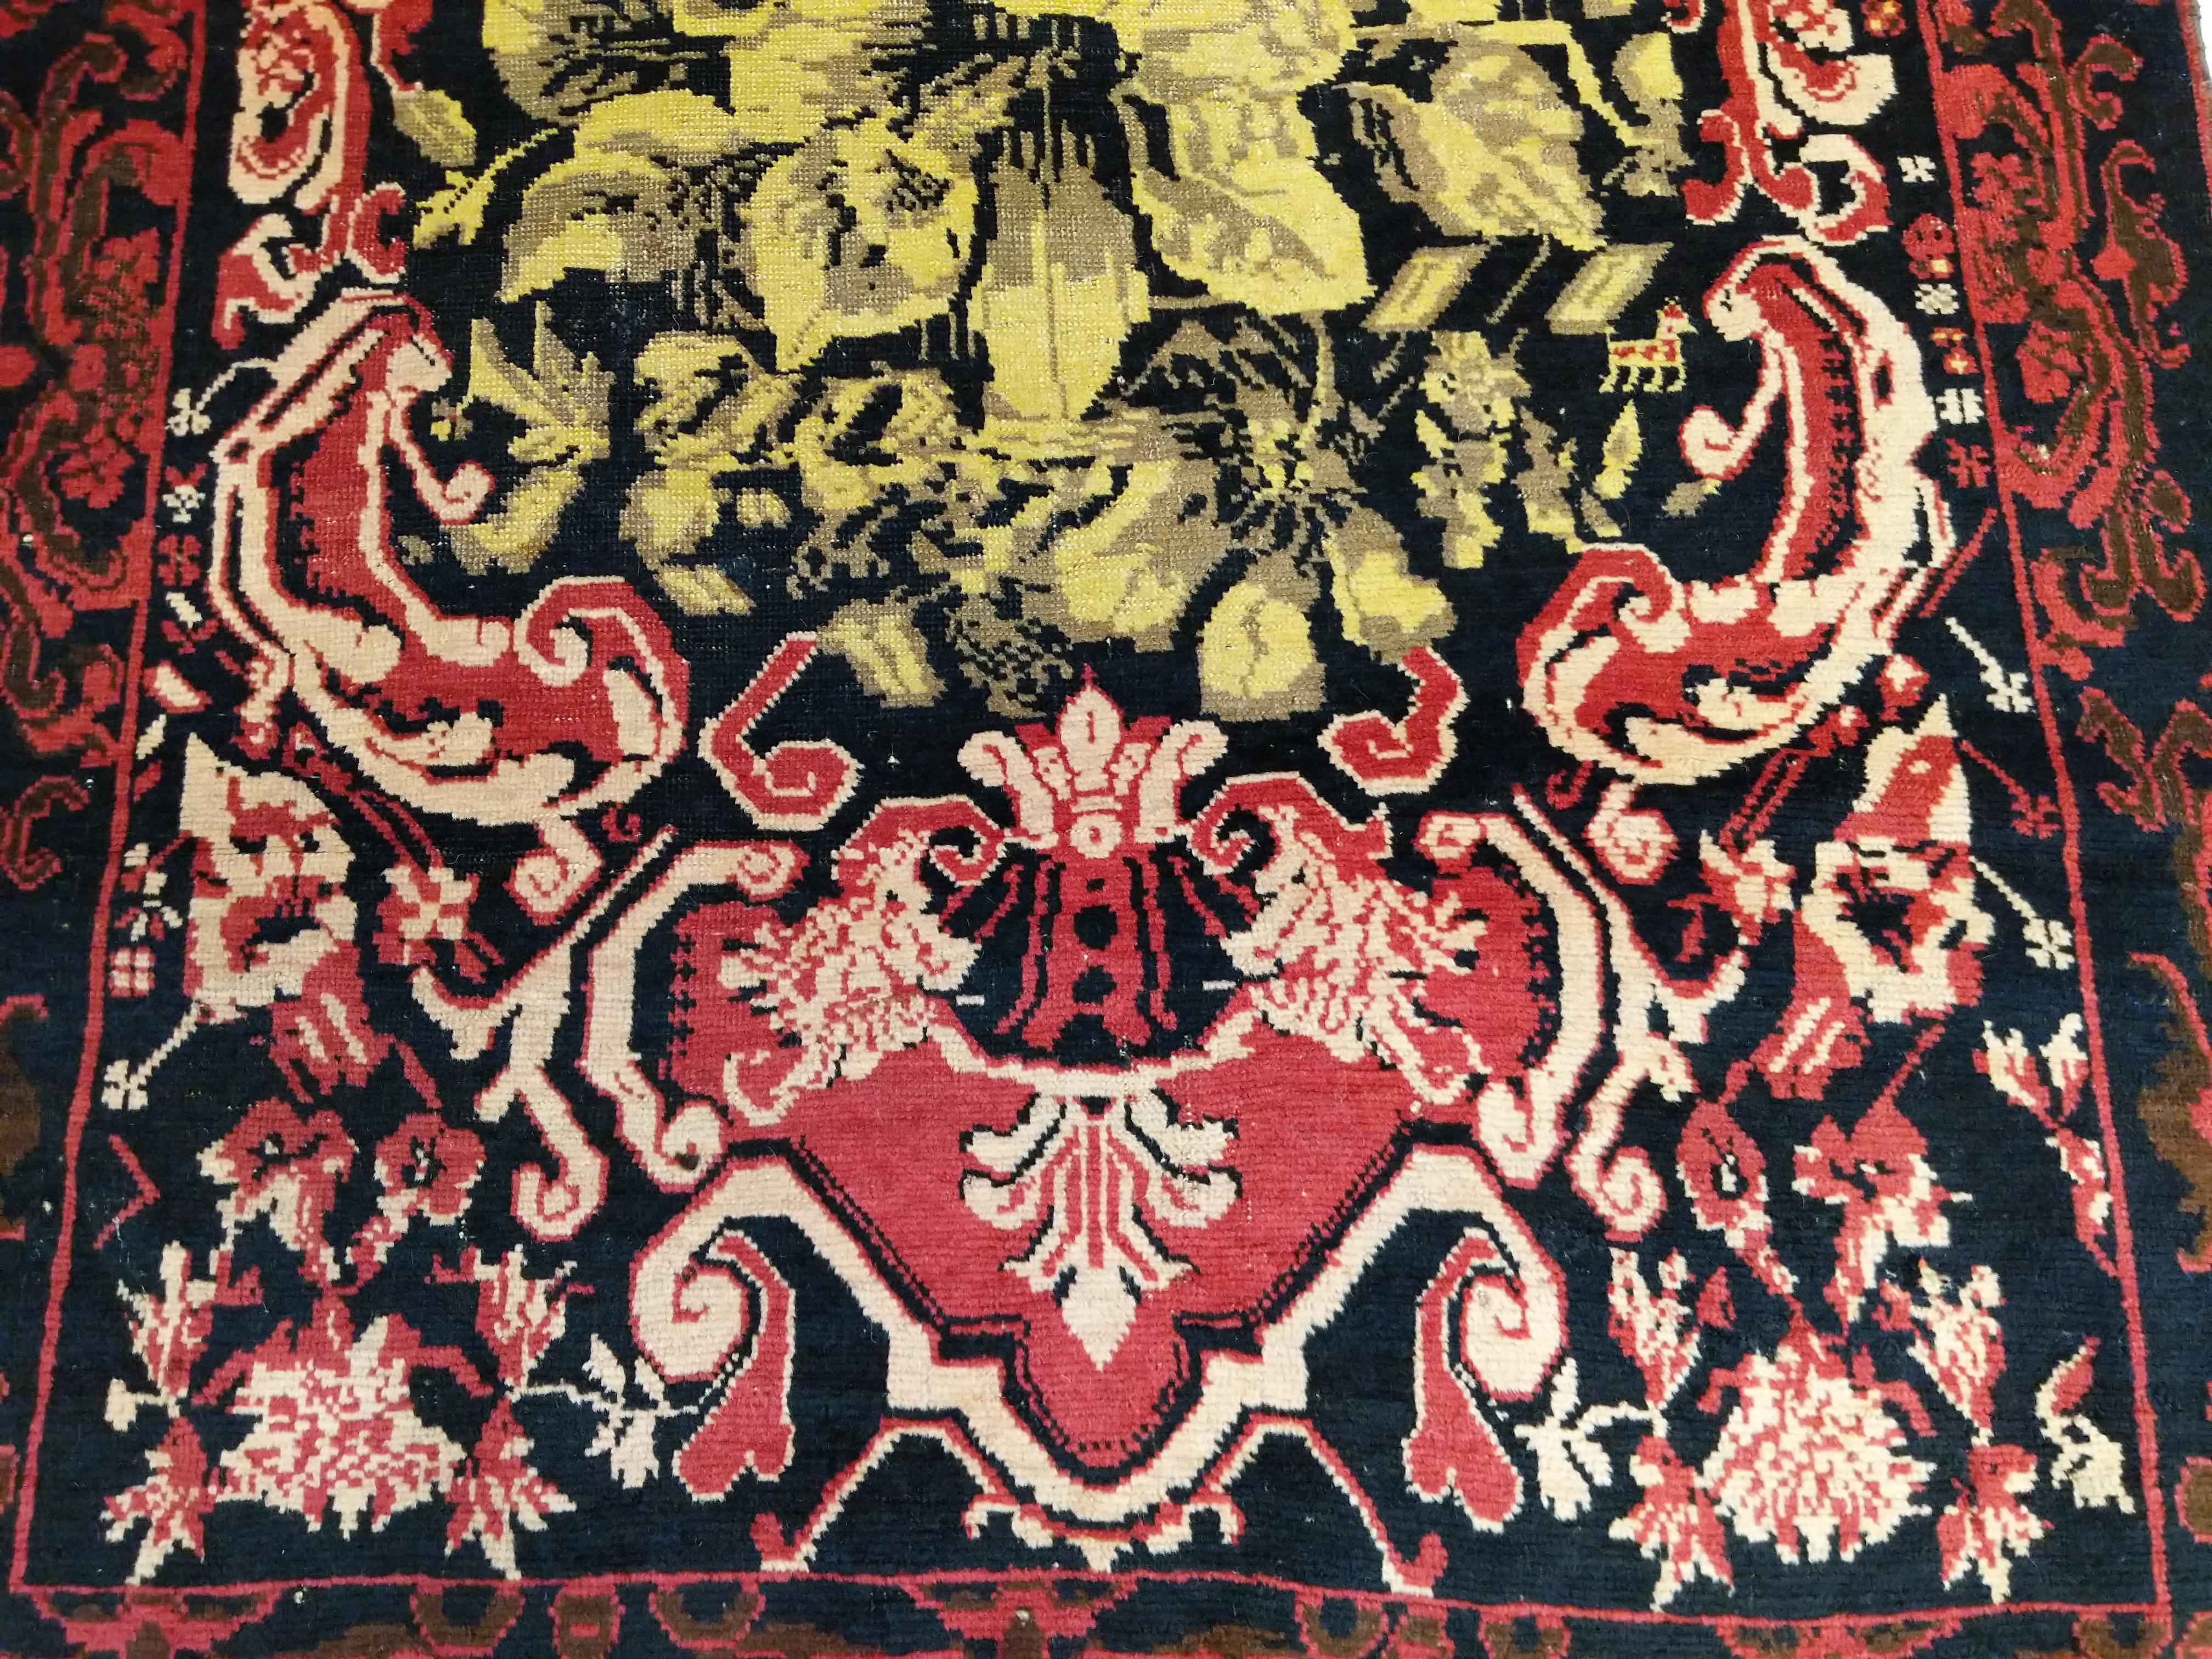 This elegant floral runner belongs to a rare subgroup of early rugs from the Qarabagh Khanate, ornated by motifs inspired by French Savonnerie and Aubusson carpets. During the nineteenth century rugs such as this one were commissioned by the Russian